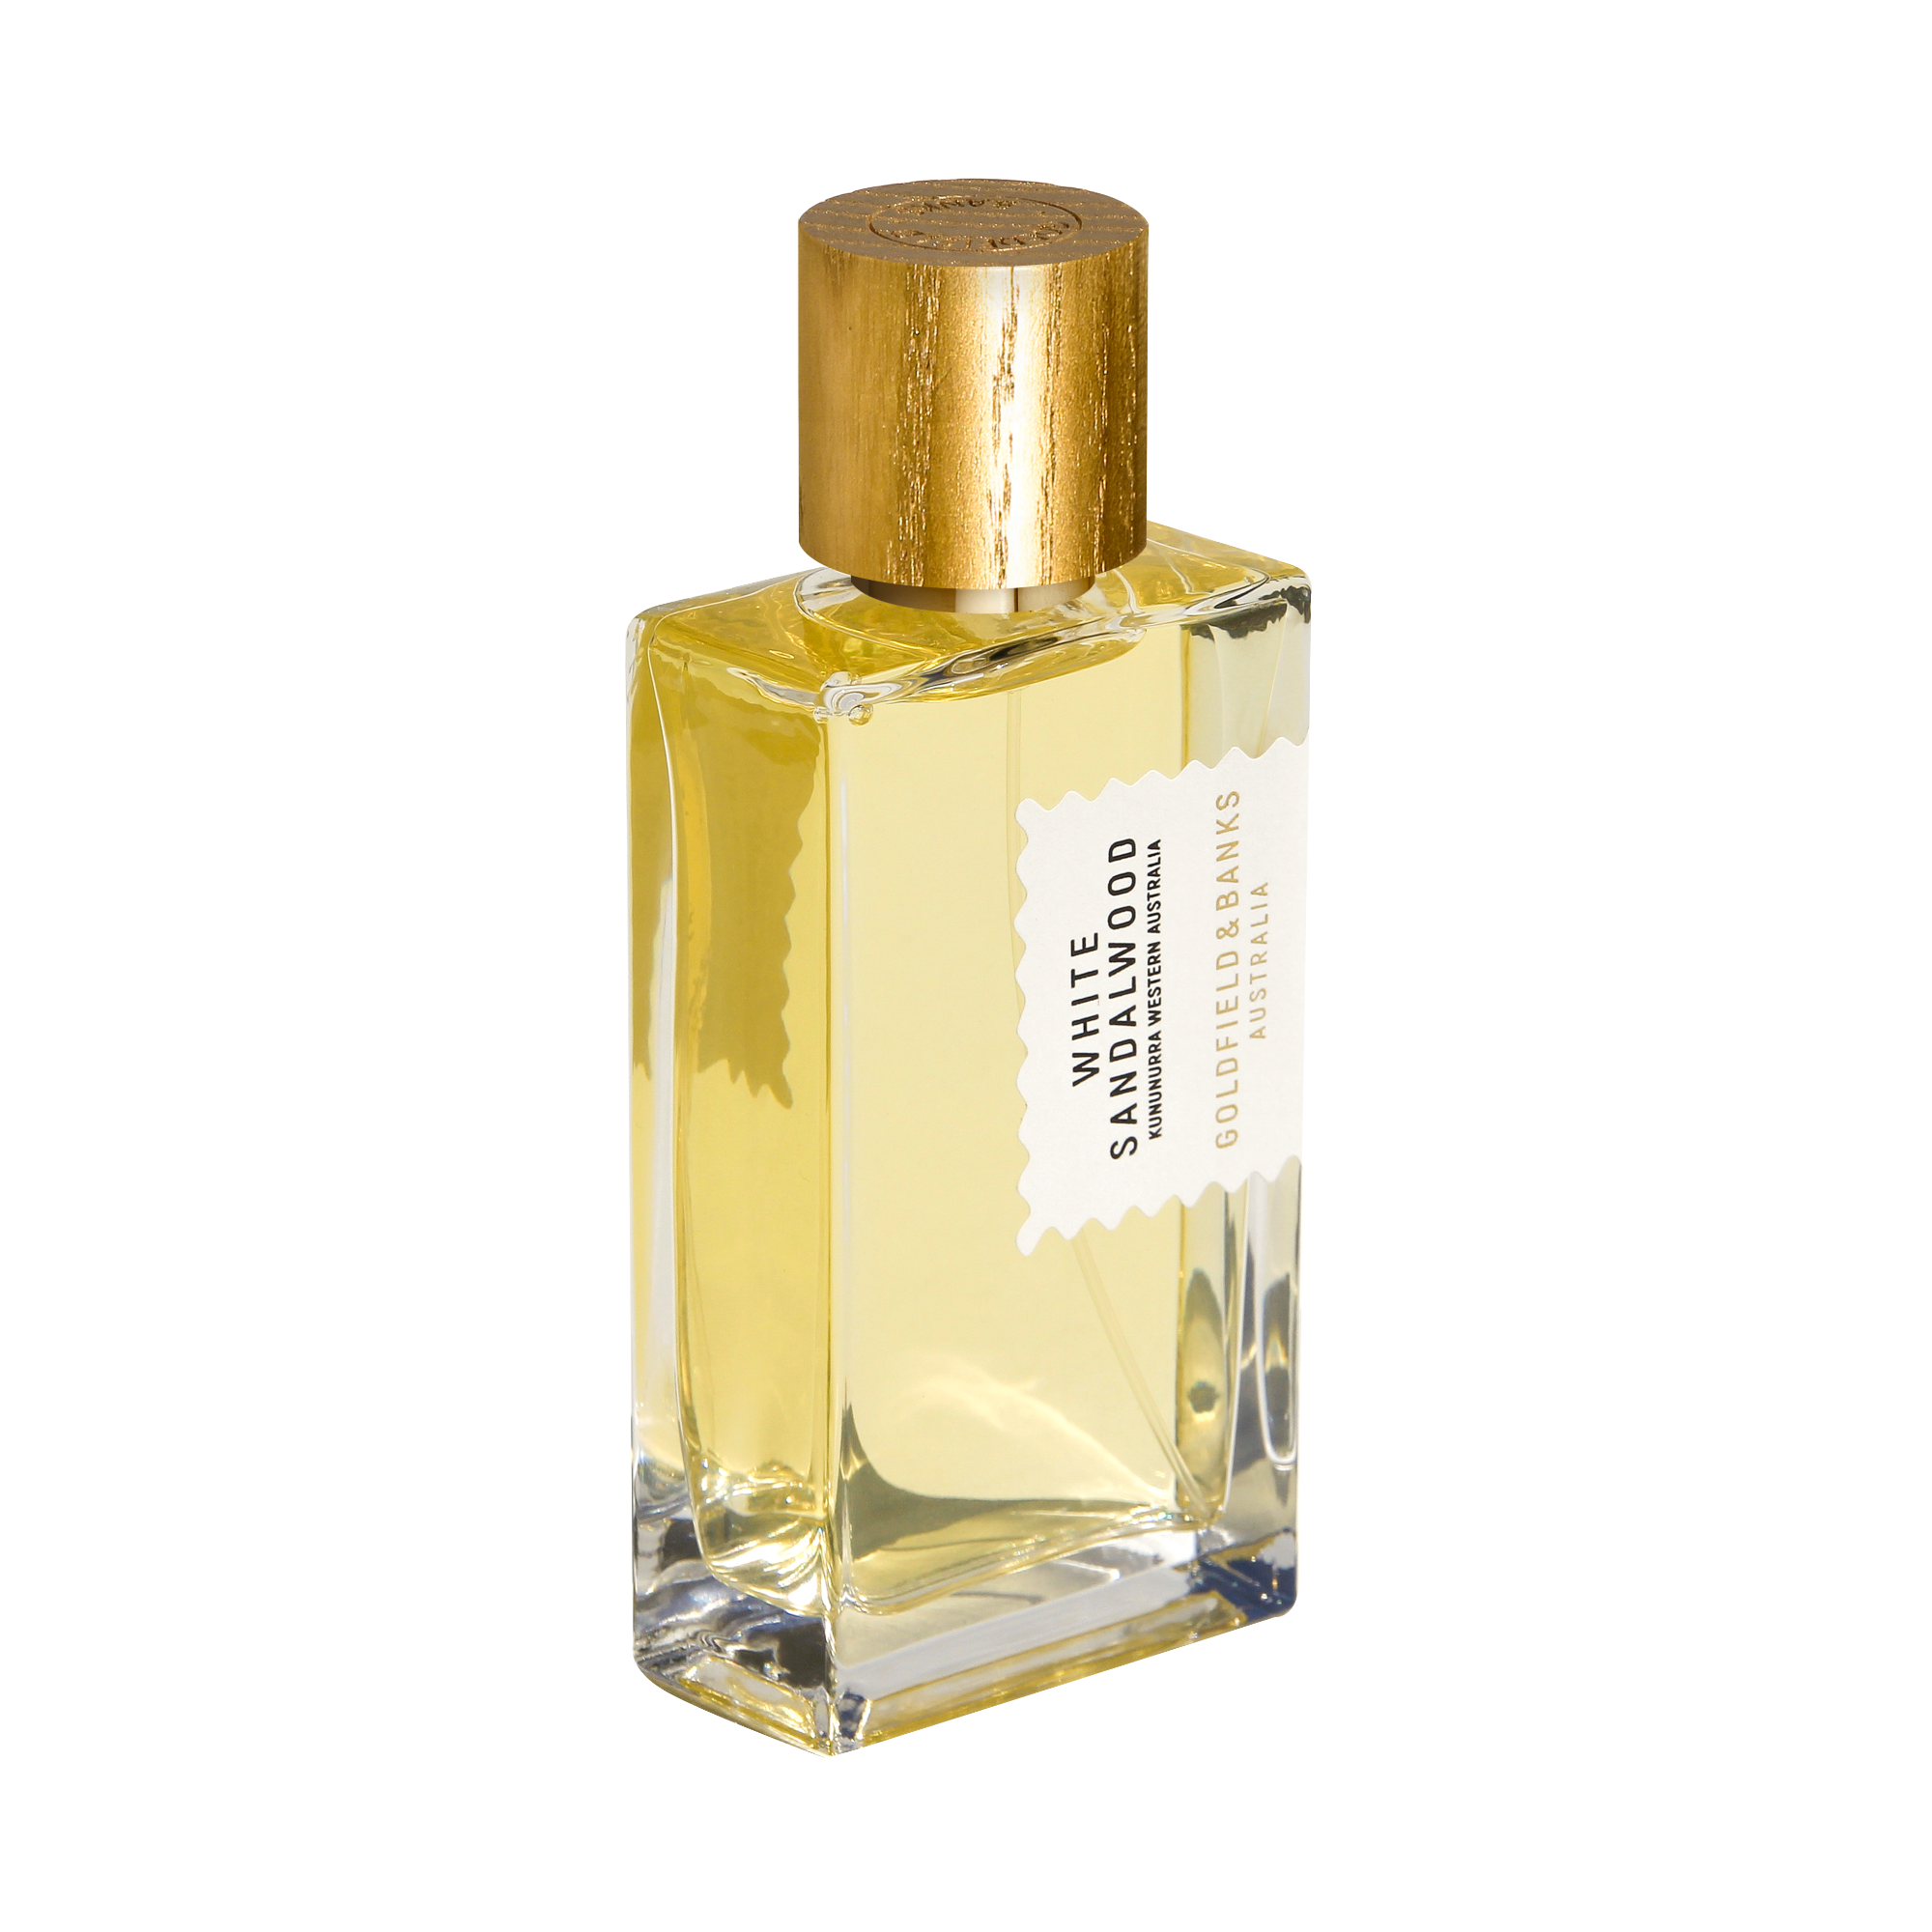 White Sandalwood Perfume Concentrate